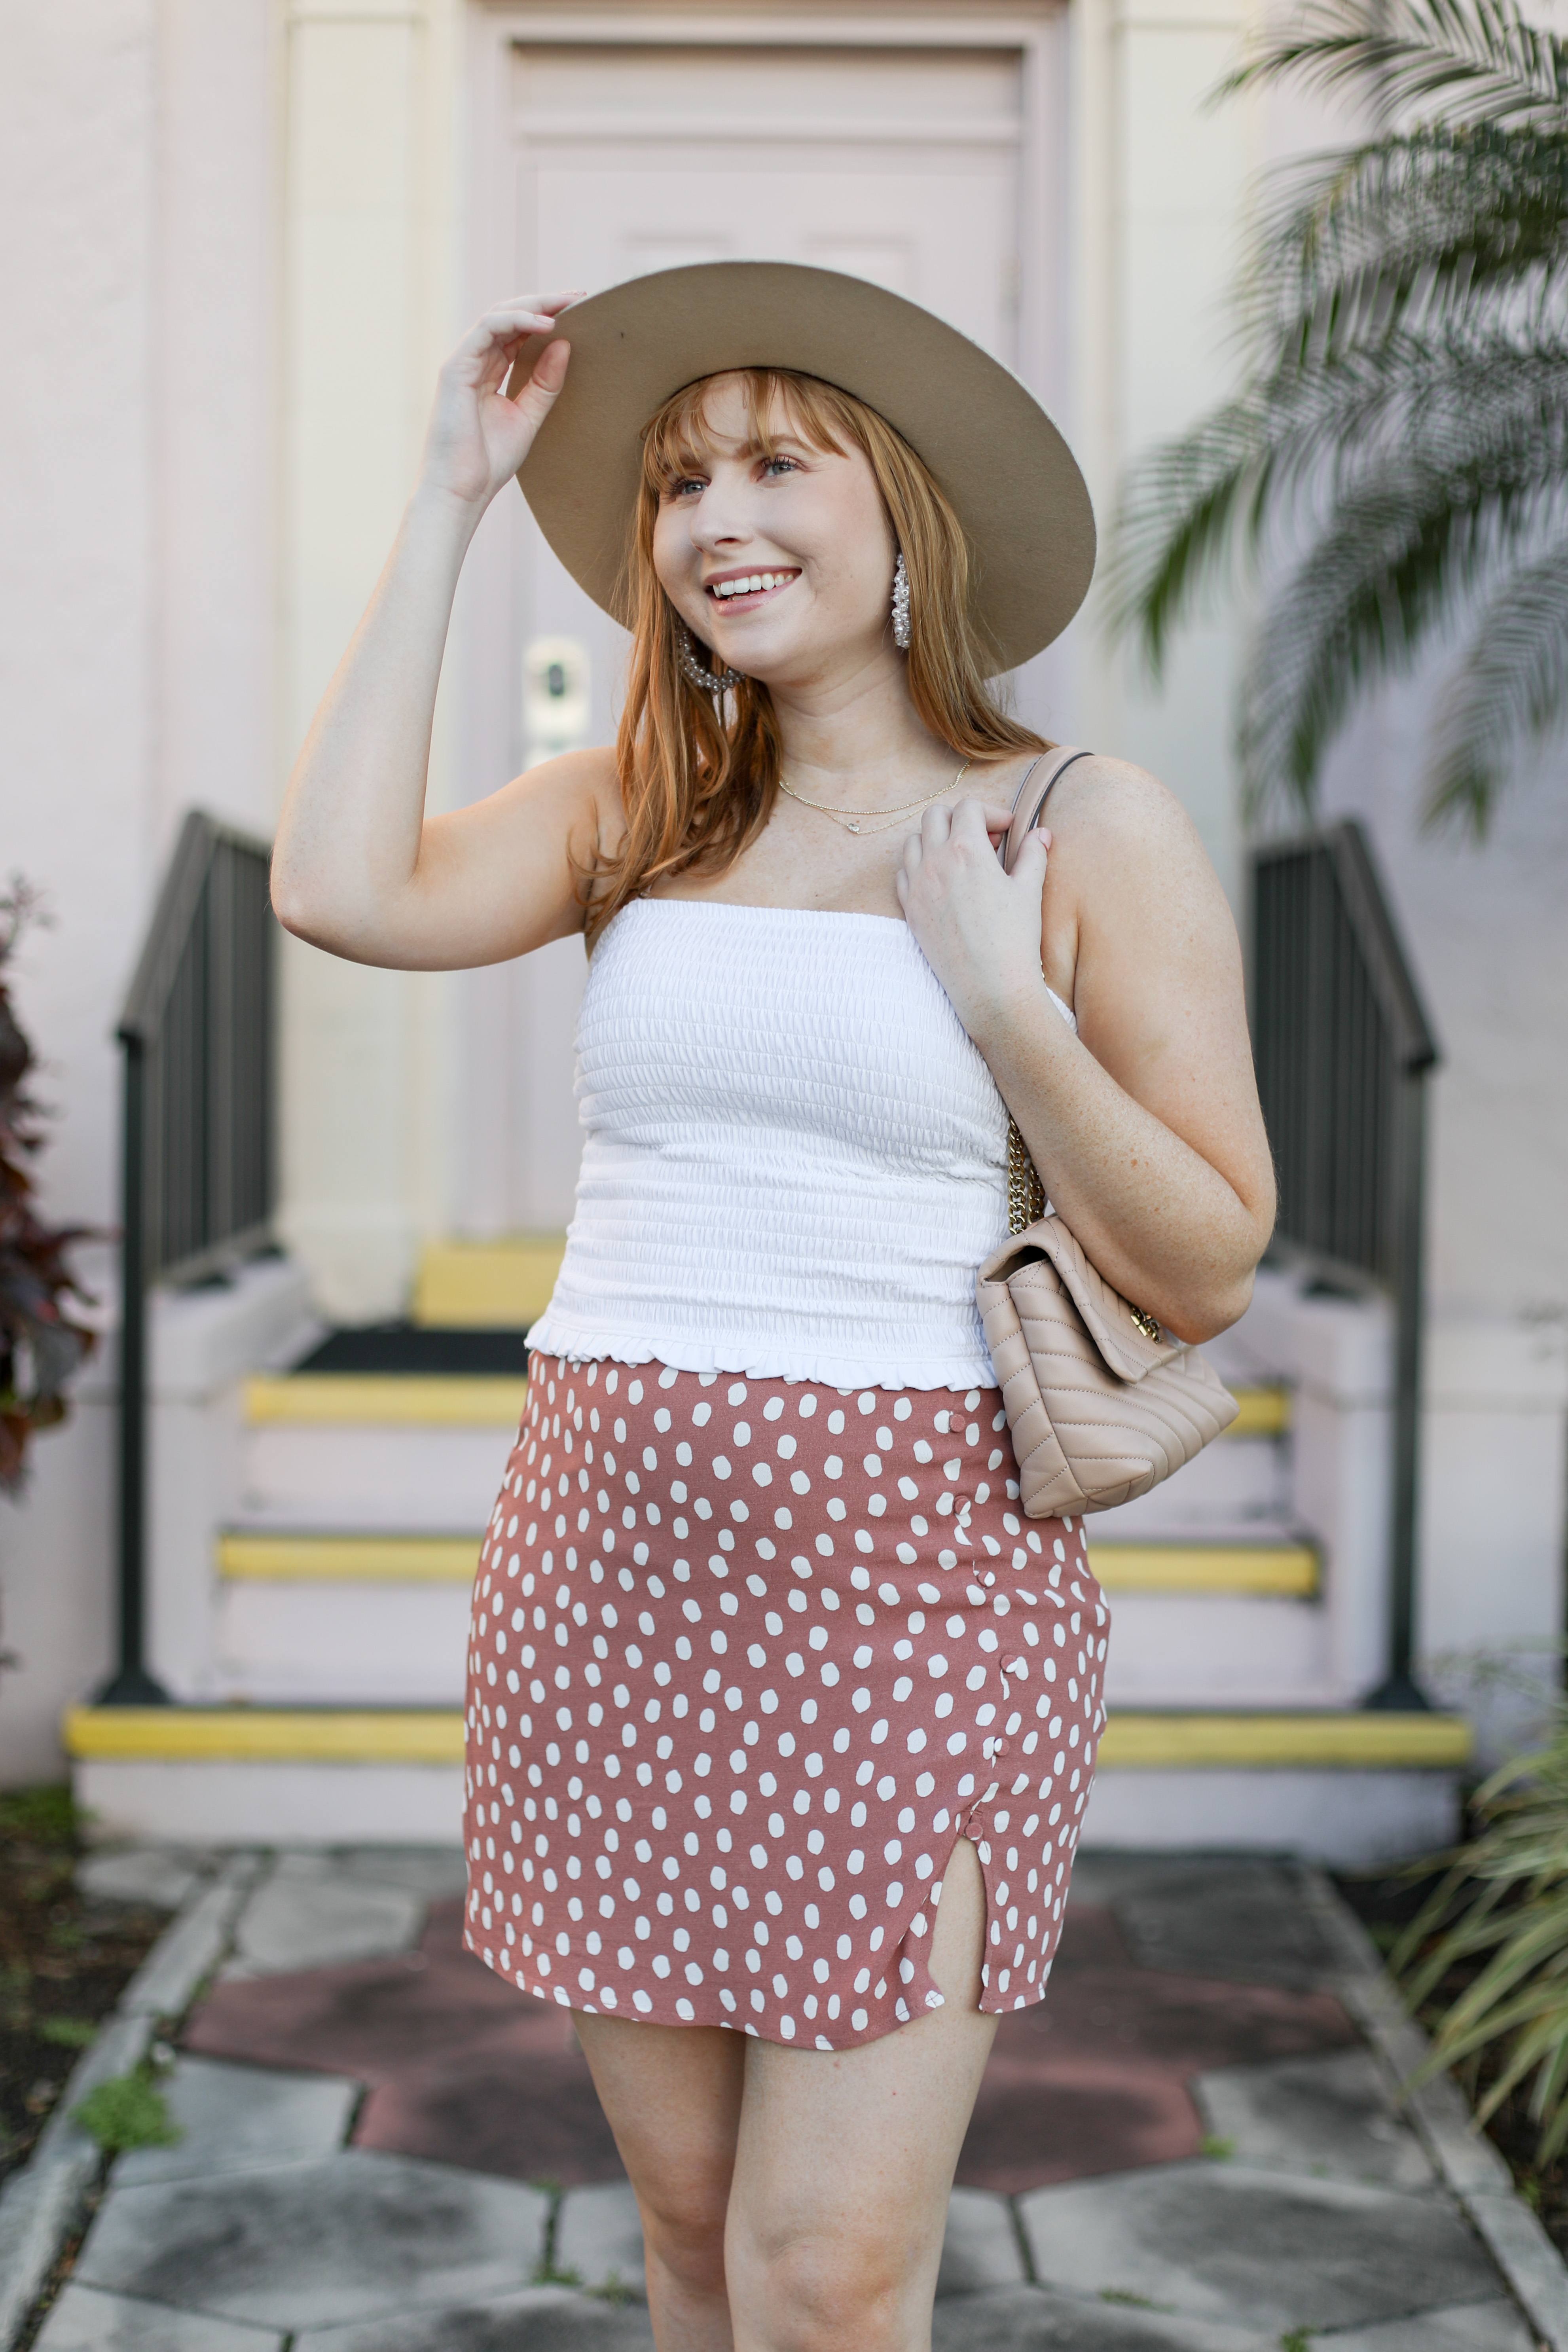 10 Vacation Outfit Ideas 2021 - Affordable by Amanda, Amanda Burrows wears a white camisole tank top, pink polka dot mini skirt, beige hat, and light pink bag on her shoulder.